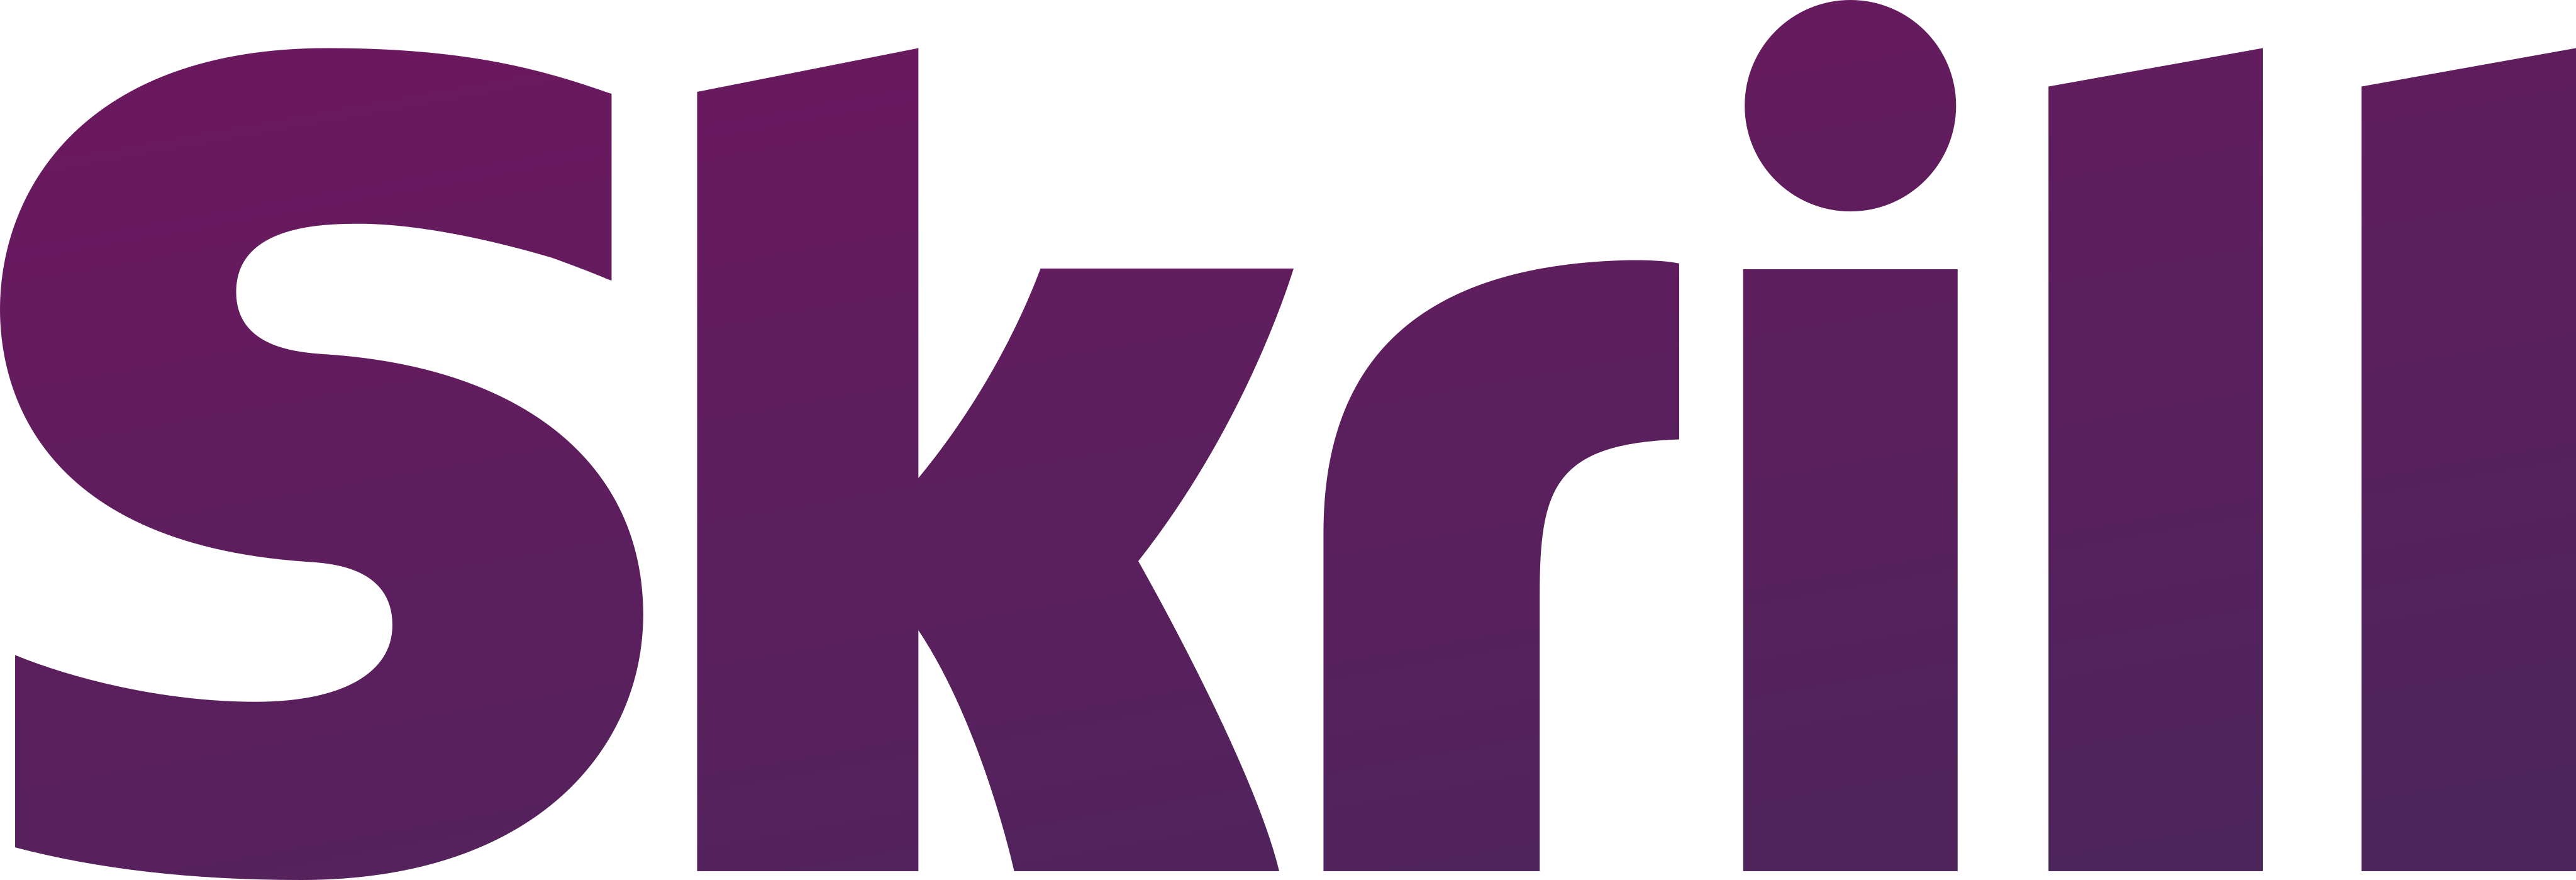 Skrill payment method icon